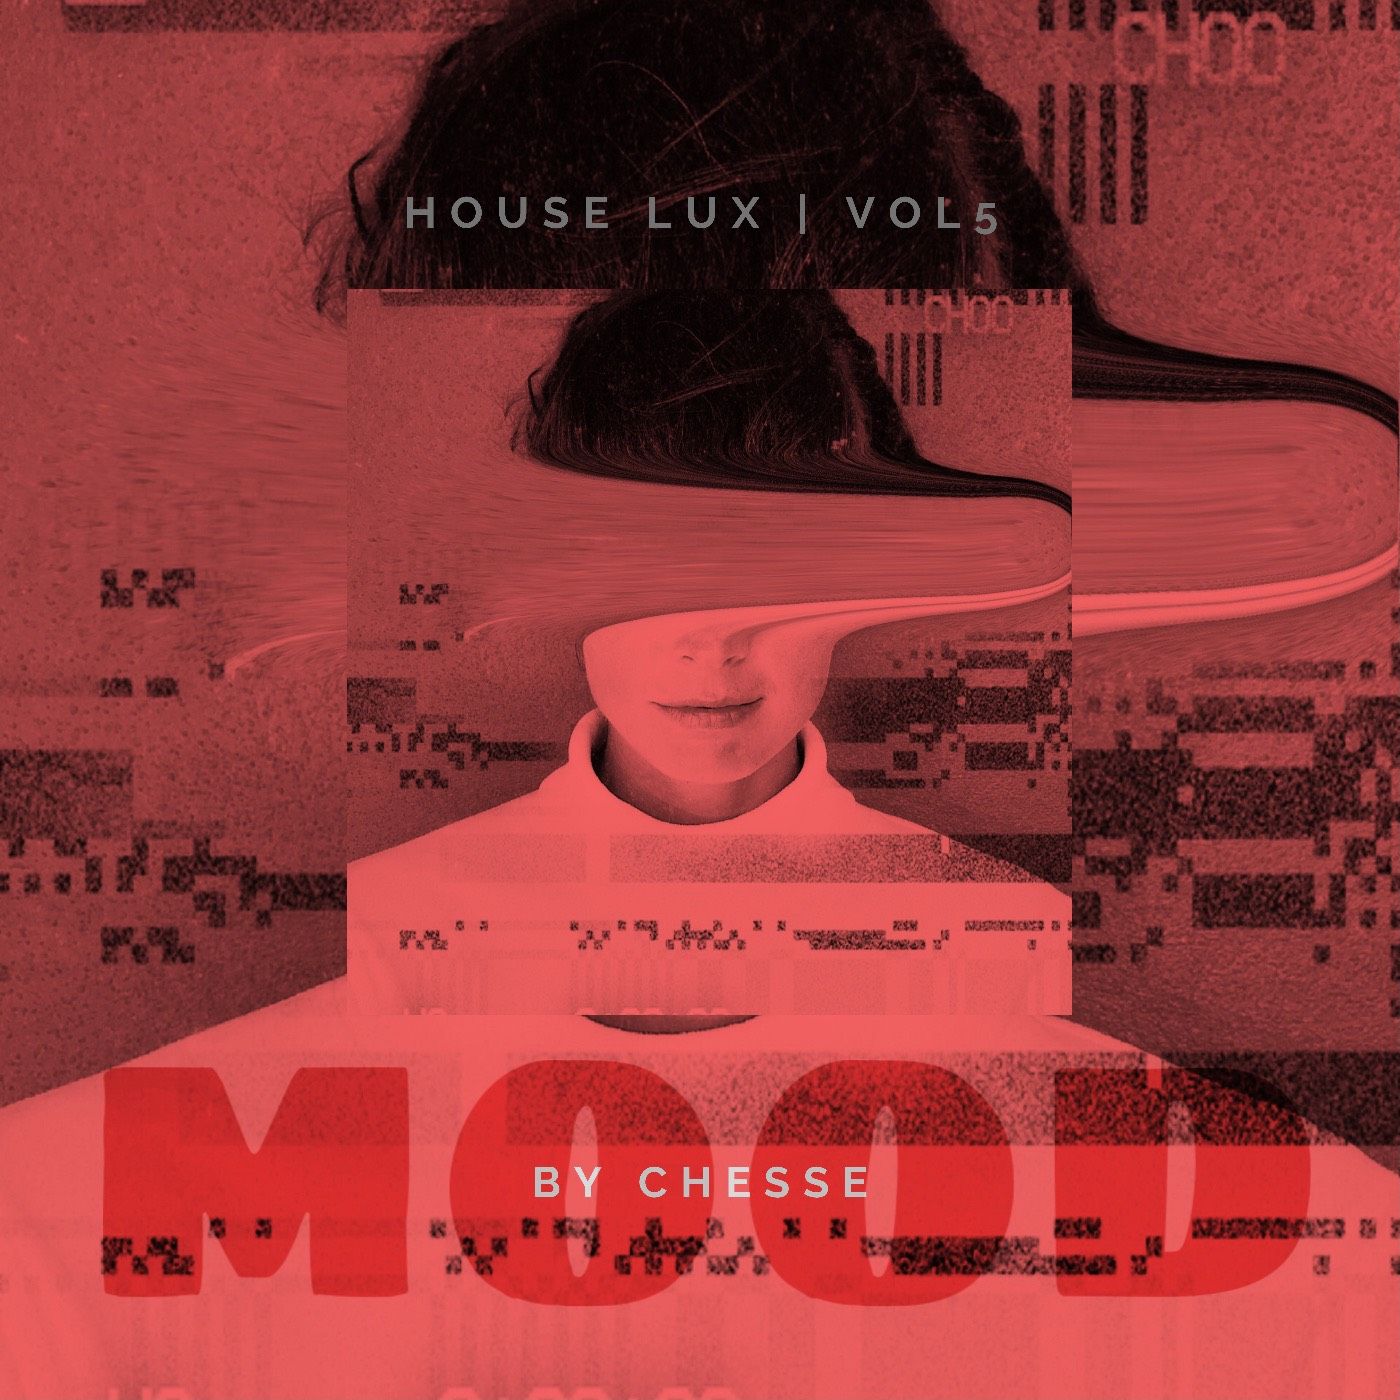 Download MOOD - By Chesse - House lux #005